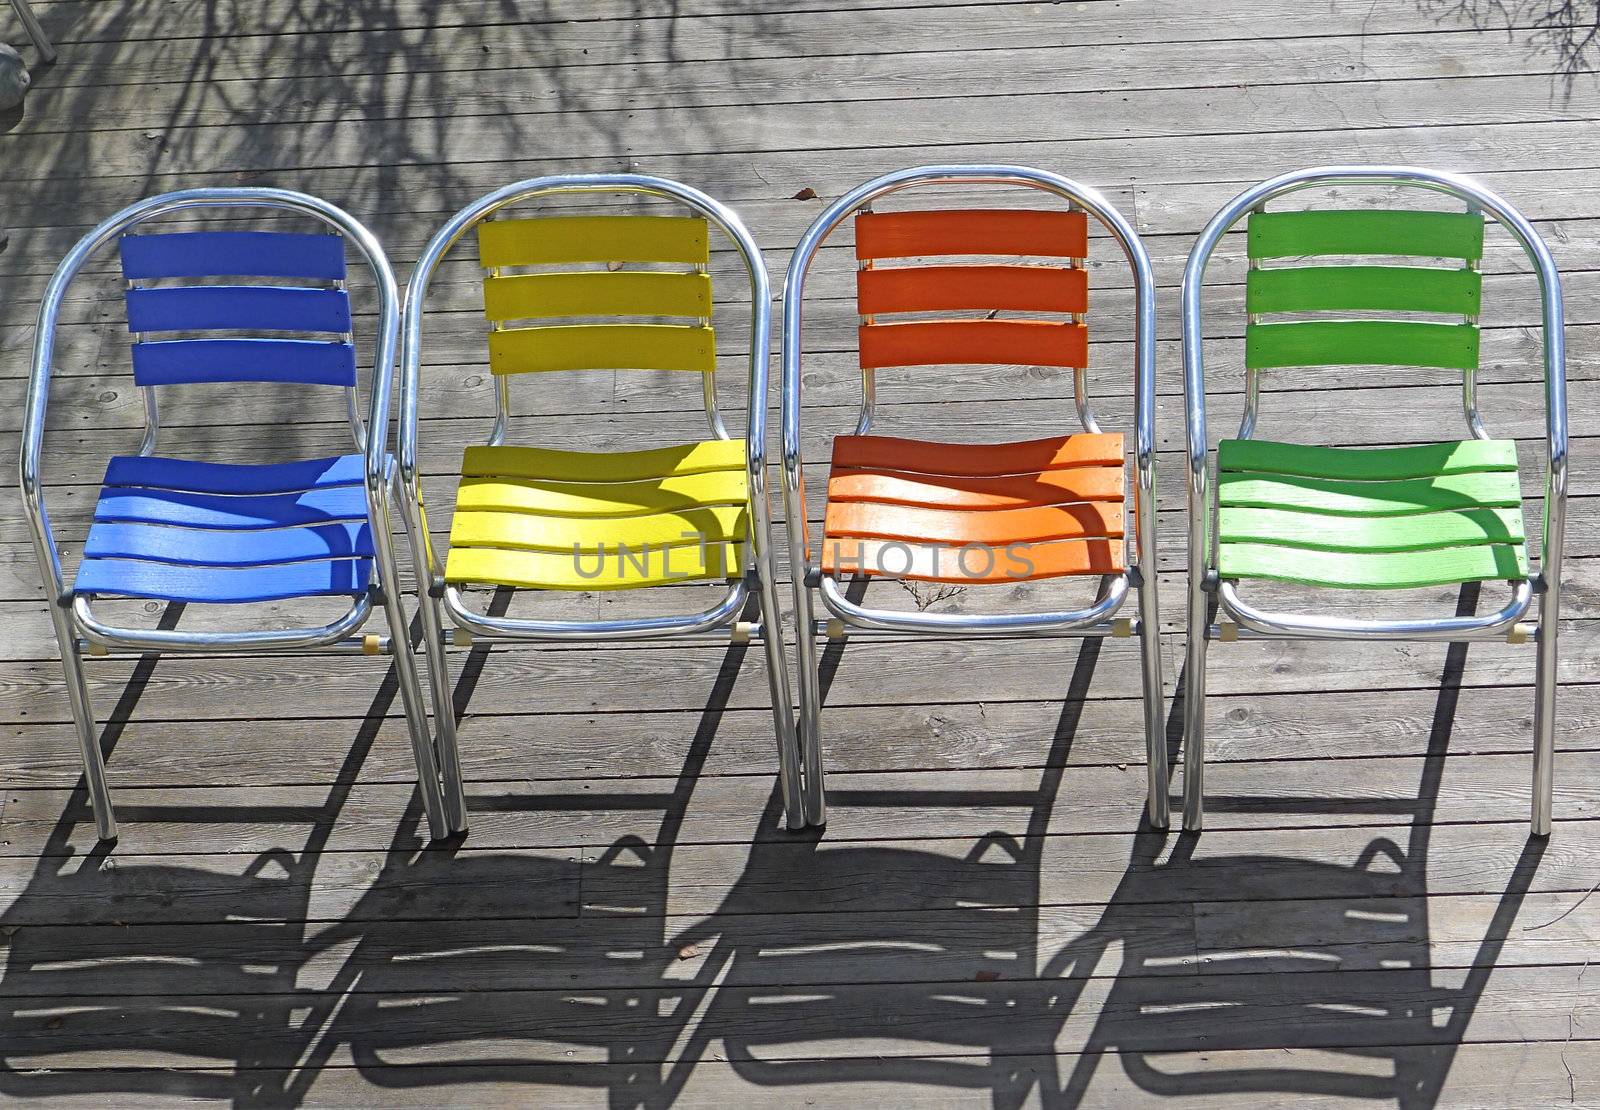 Colored garden chairs